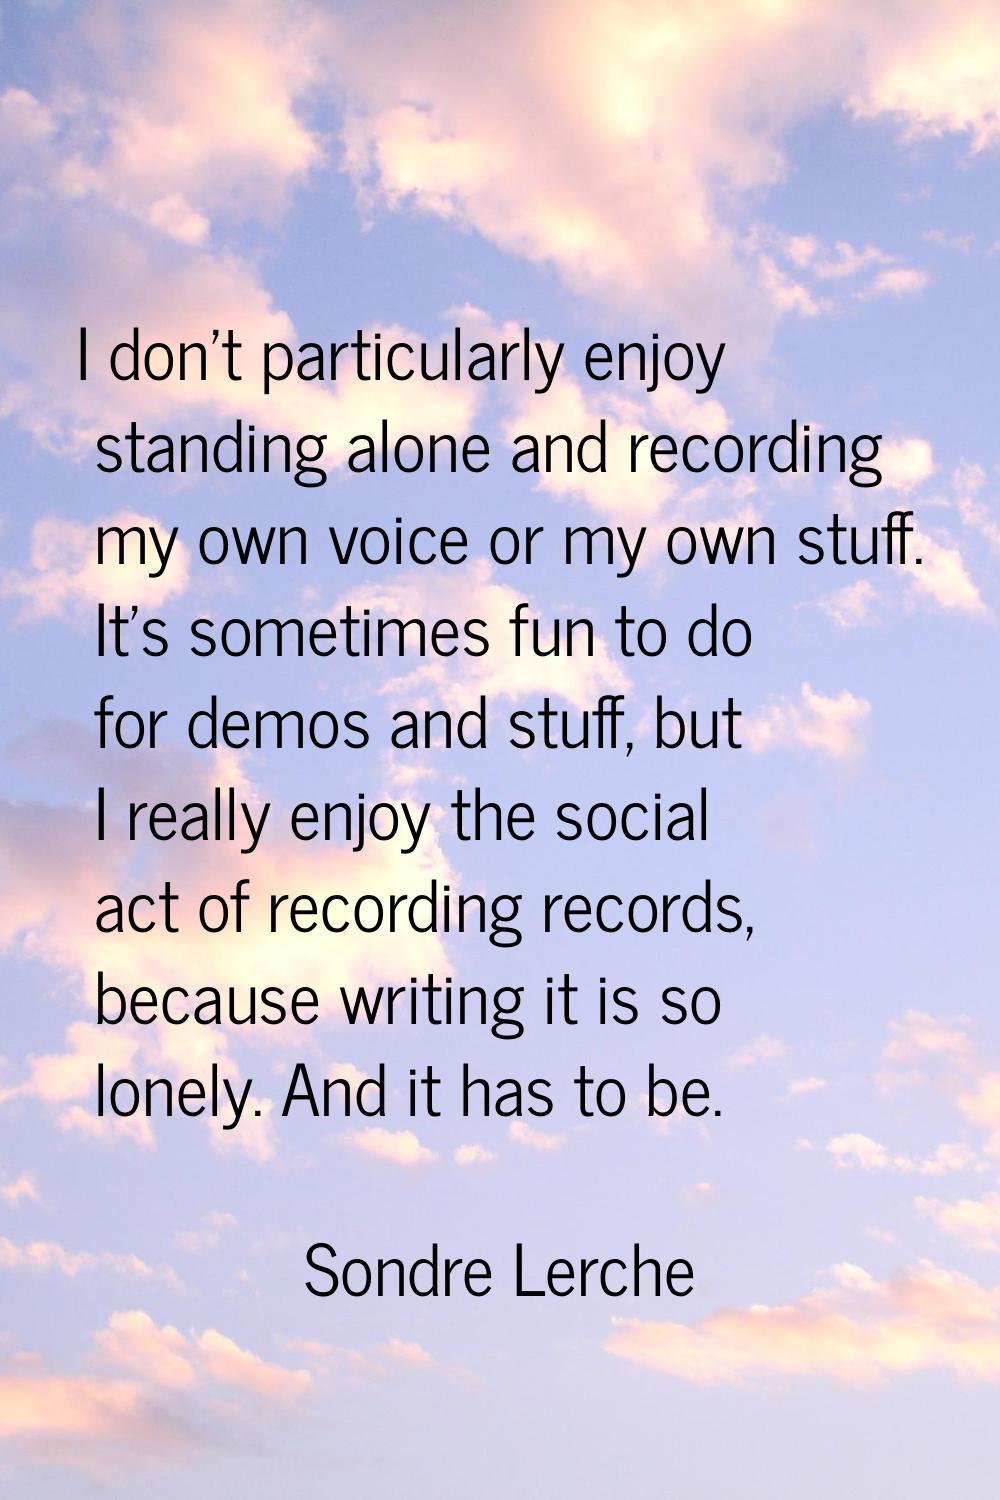 I don't particularly enjoy standing alone and recording my own voice or my own stuff. It's sometime